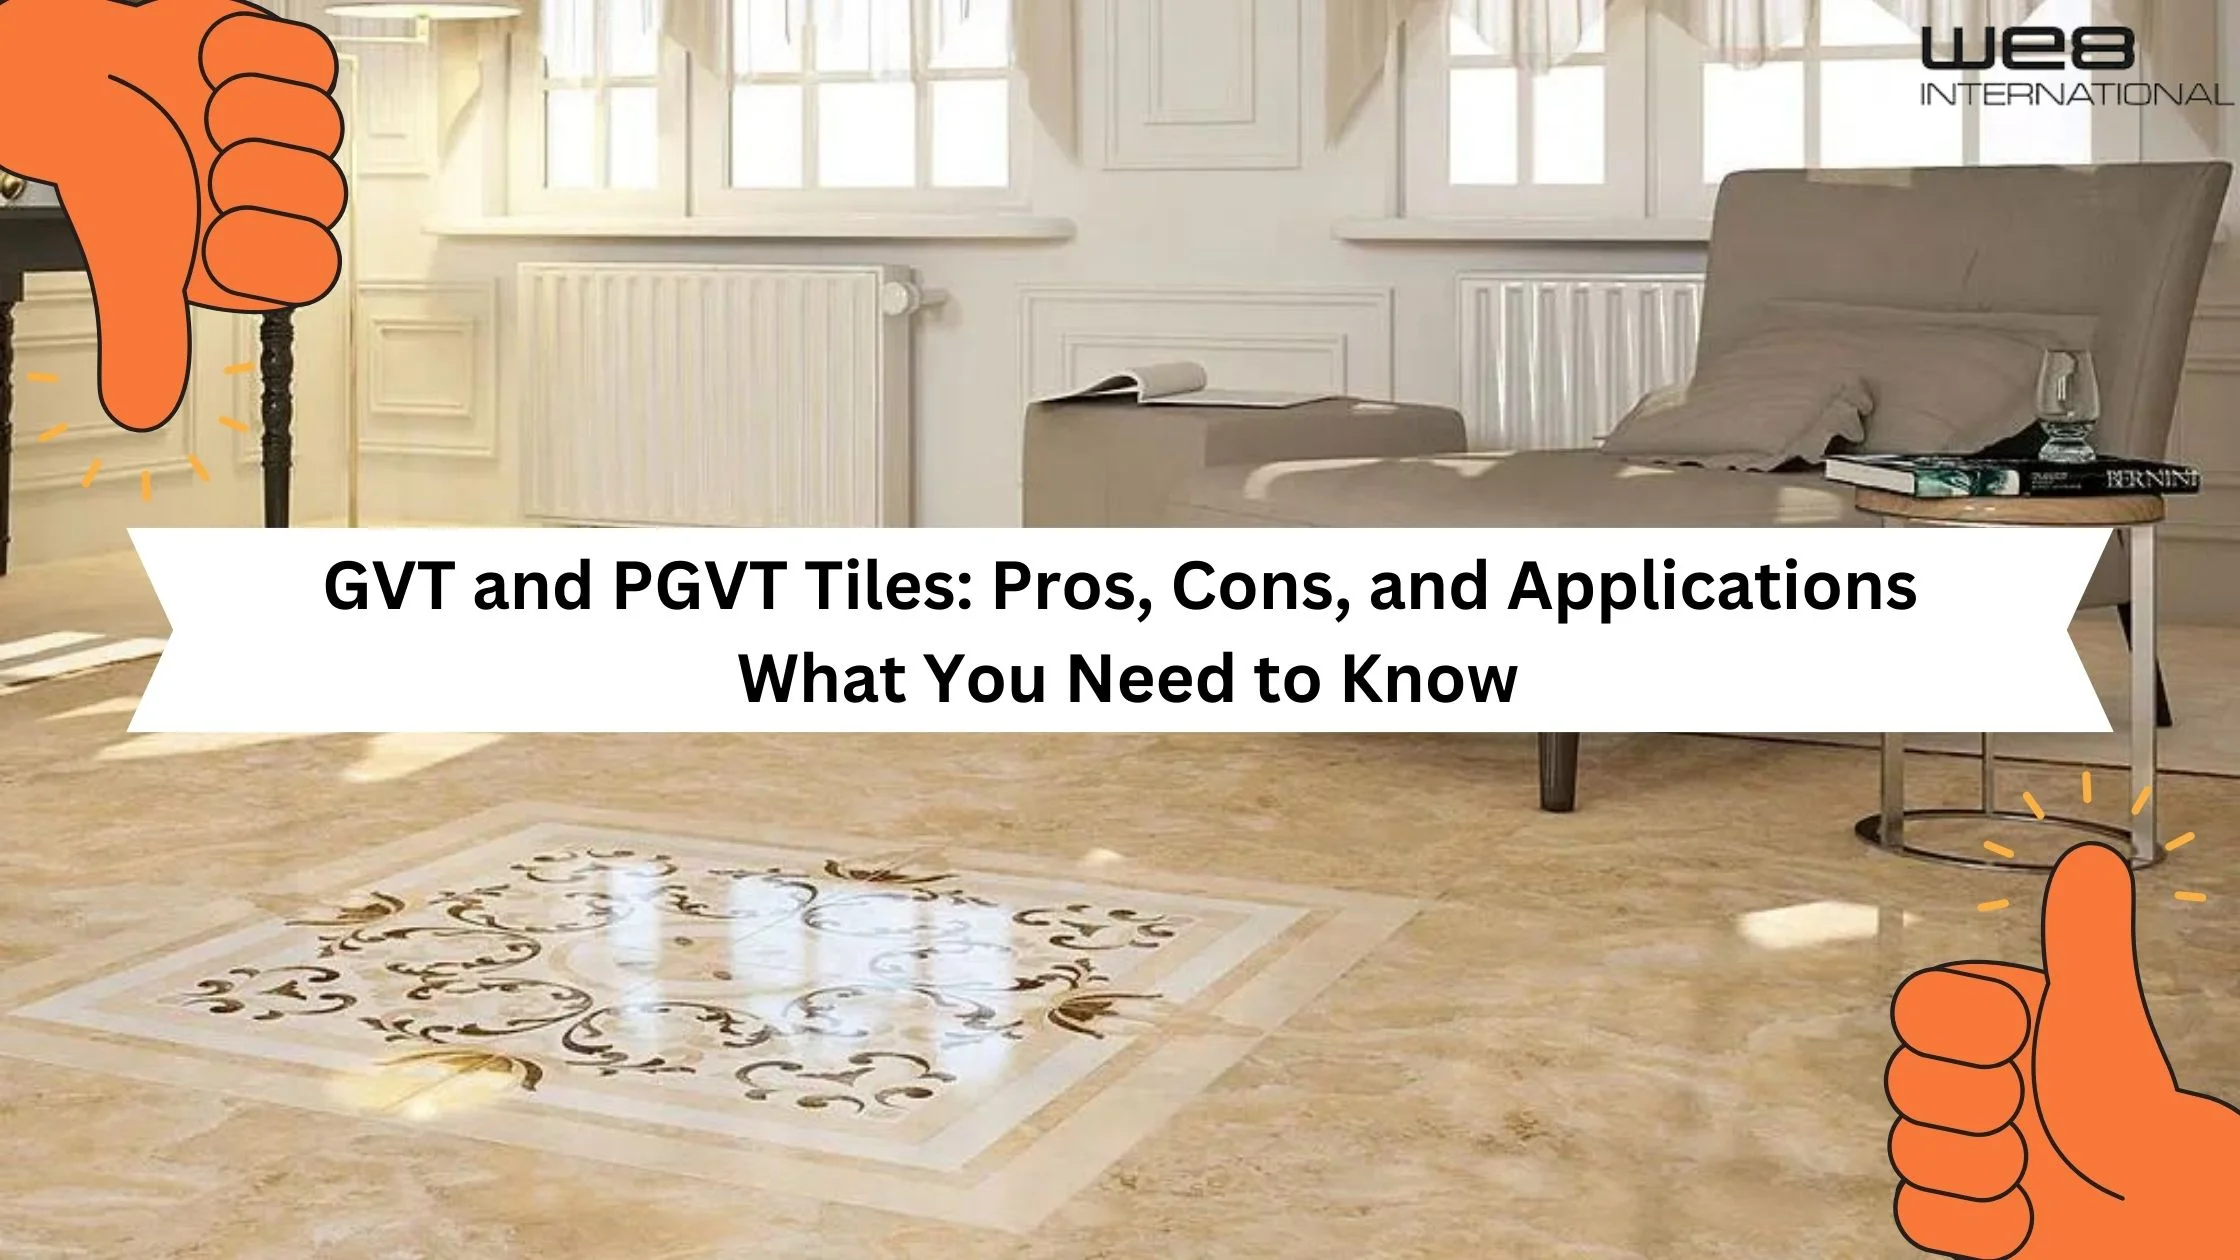 GVT and PGVT Tiles: Pros, Cons, and Applications | What You Need to Know